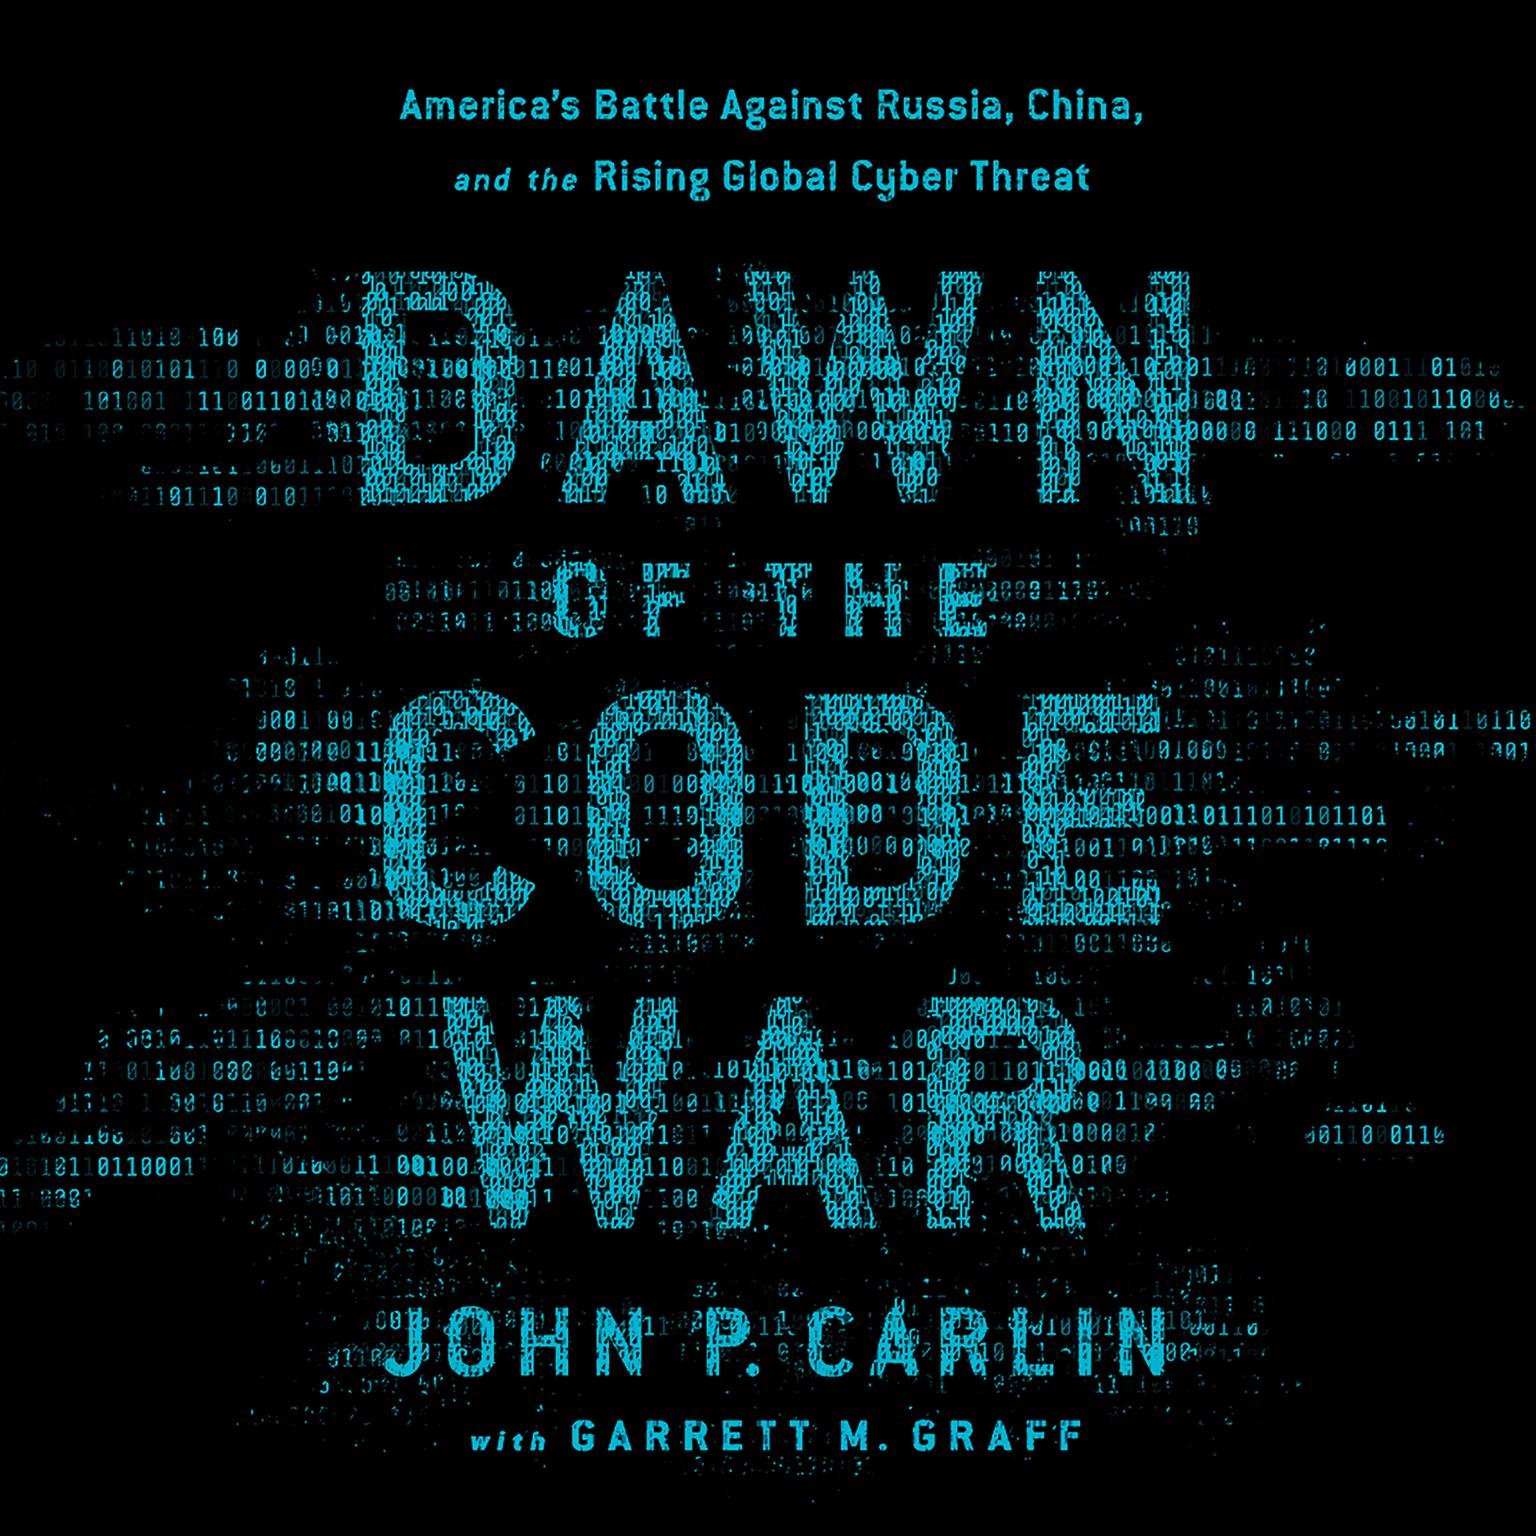 Dawn of the Code War: Americas Battle Against Russia, China, and the Rising Global Cyber Threat Audiobook, by John P. Carlin